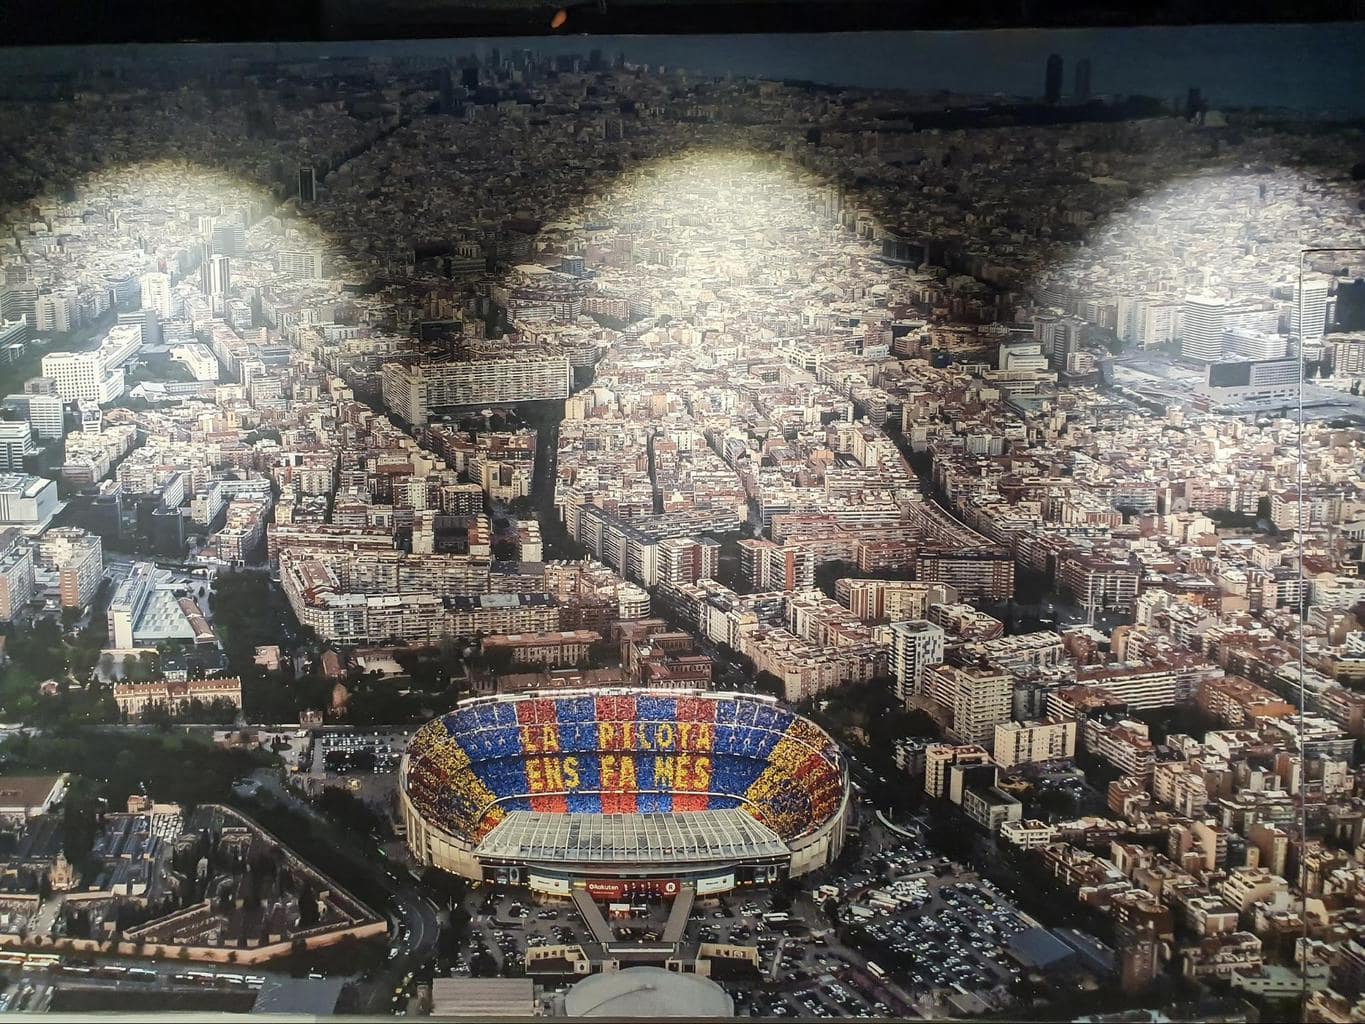 Camp Nou in the middle of Les Corts district